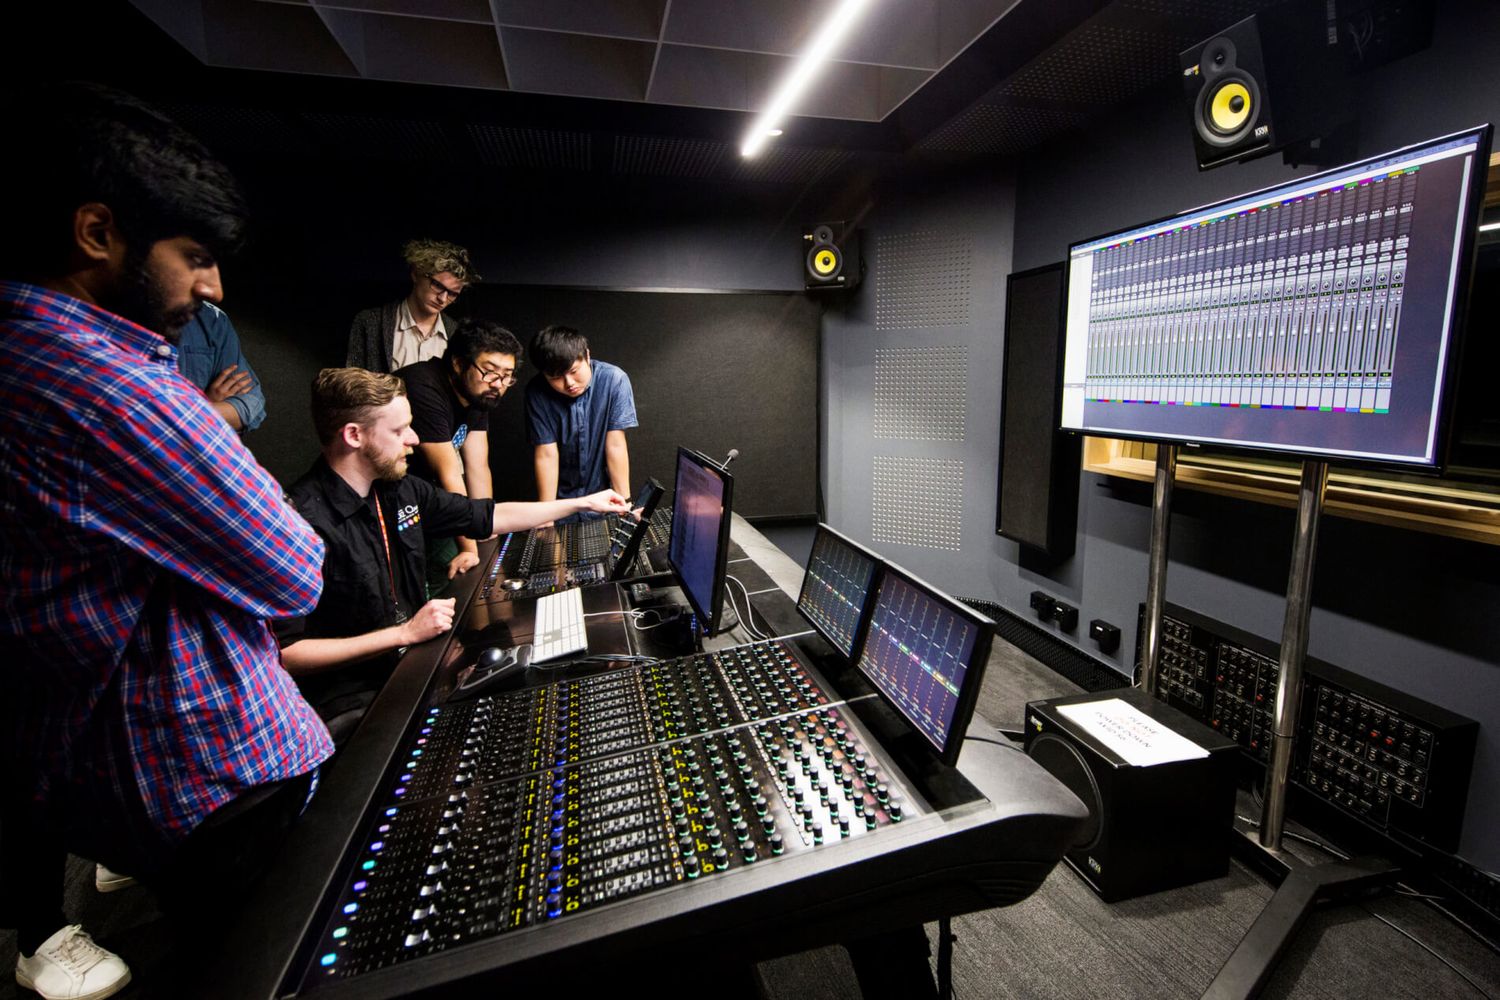 How Long Do You Have To Study To Become A Sound Engineer?